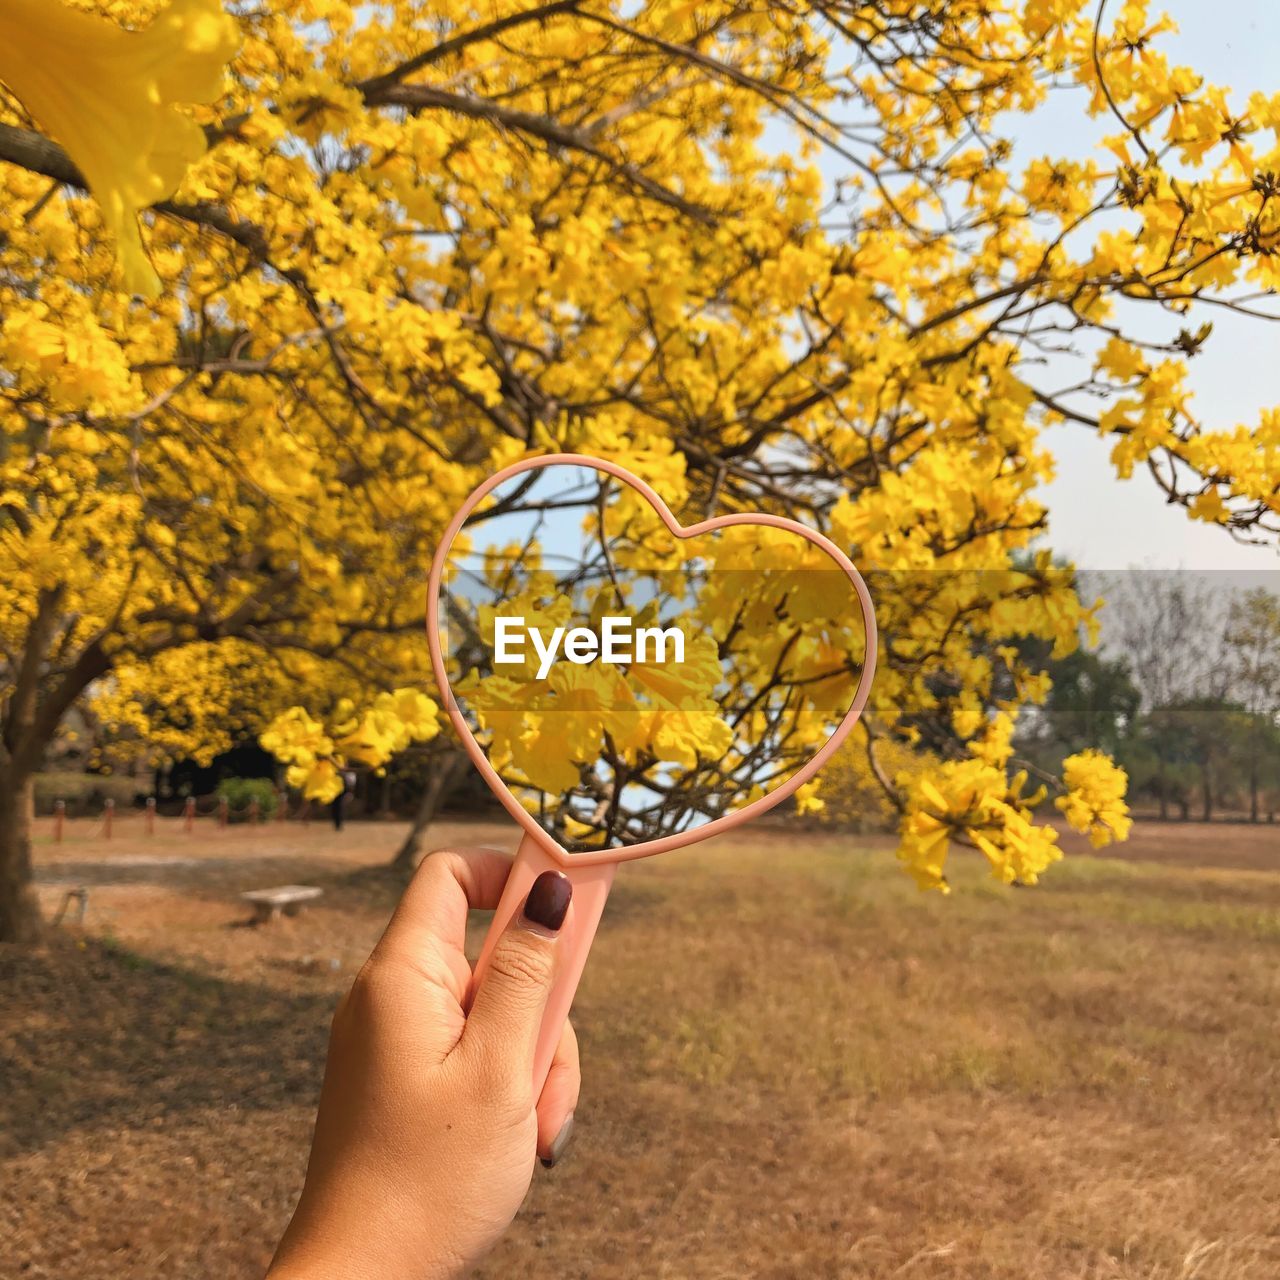 Cropped hand of woman holding heart shape mirror against trees in park during autumn